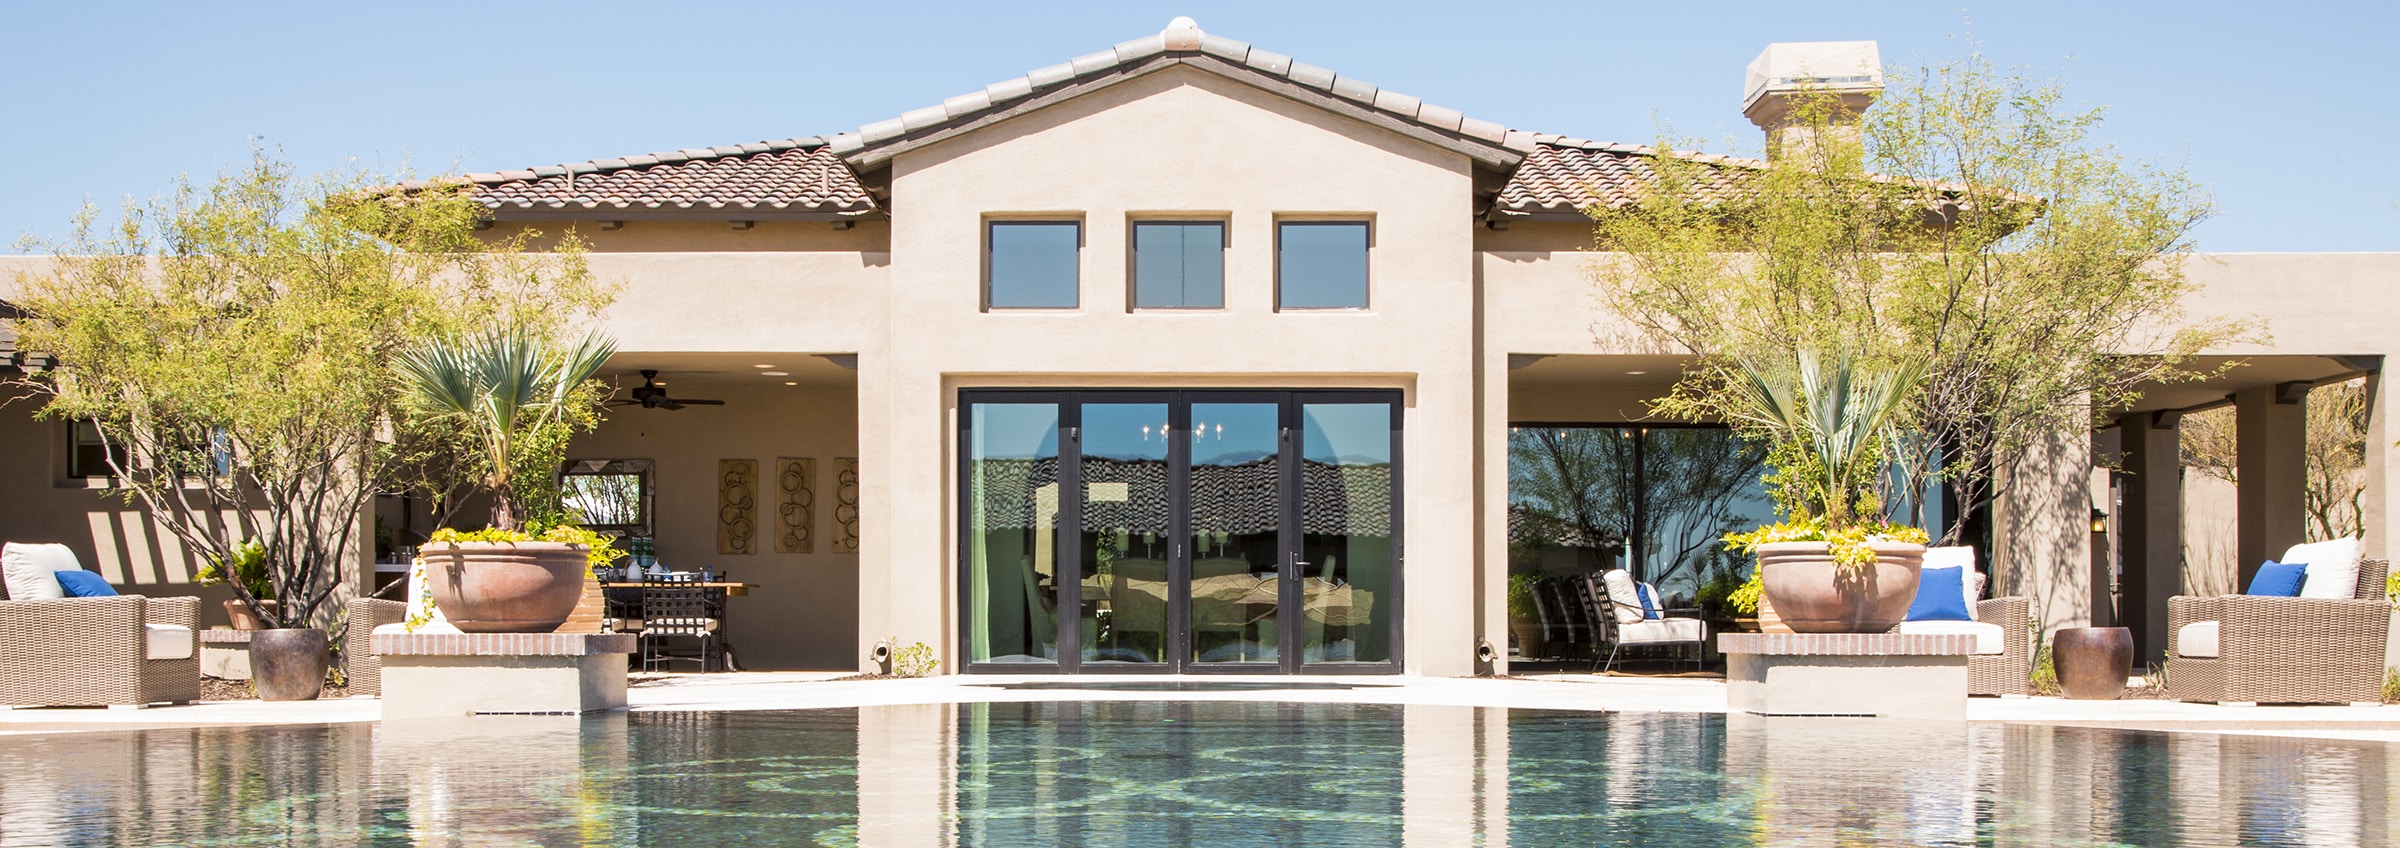 An outdoor pool is easily accessible from the back of a house via tall multi-slide glass doors.